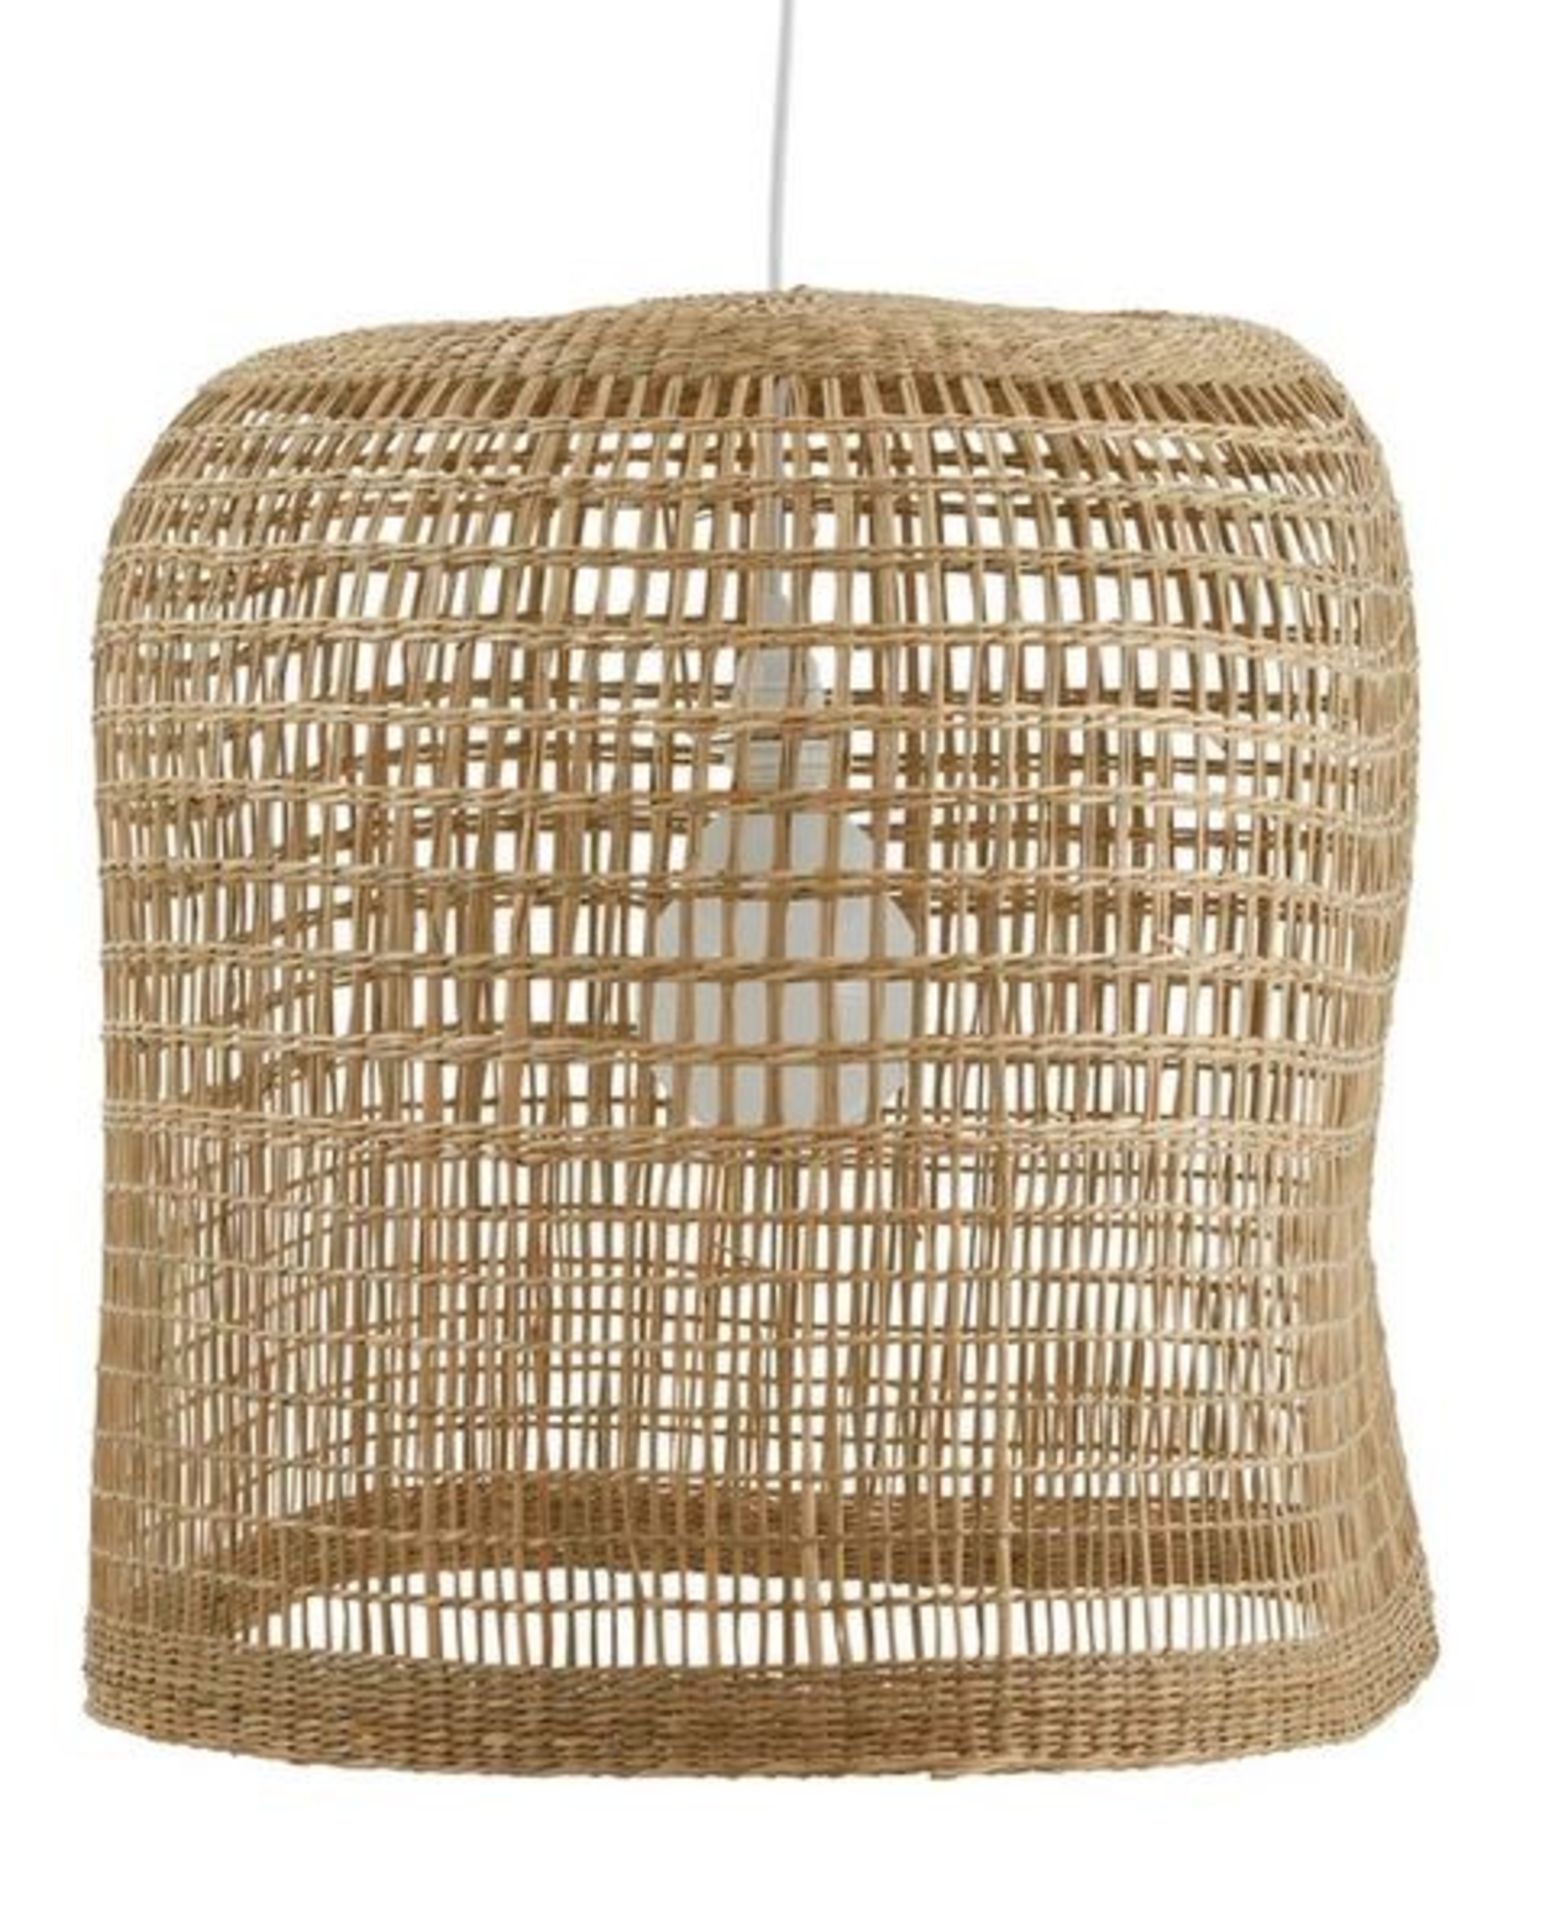 1 GRADE A PARVATI BASKET STYLE BRAIDED WICKER LIGHTSHADE / RRP £130.00 (PUBLIC VIEWING AVAILABLE)